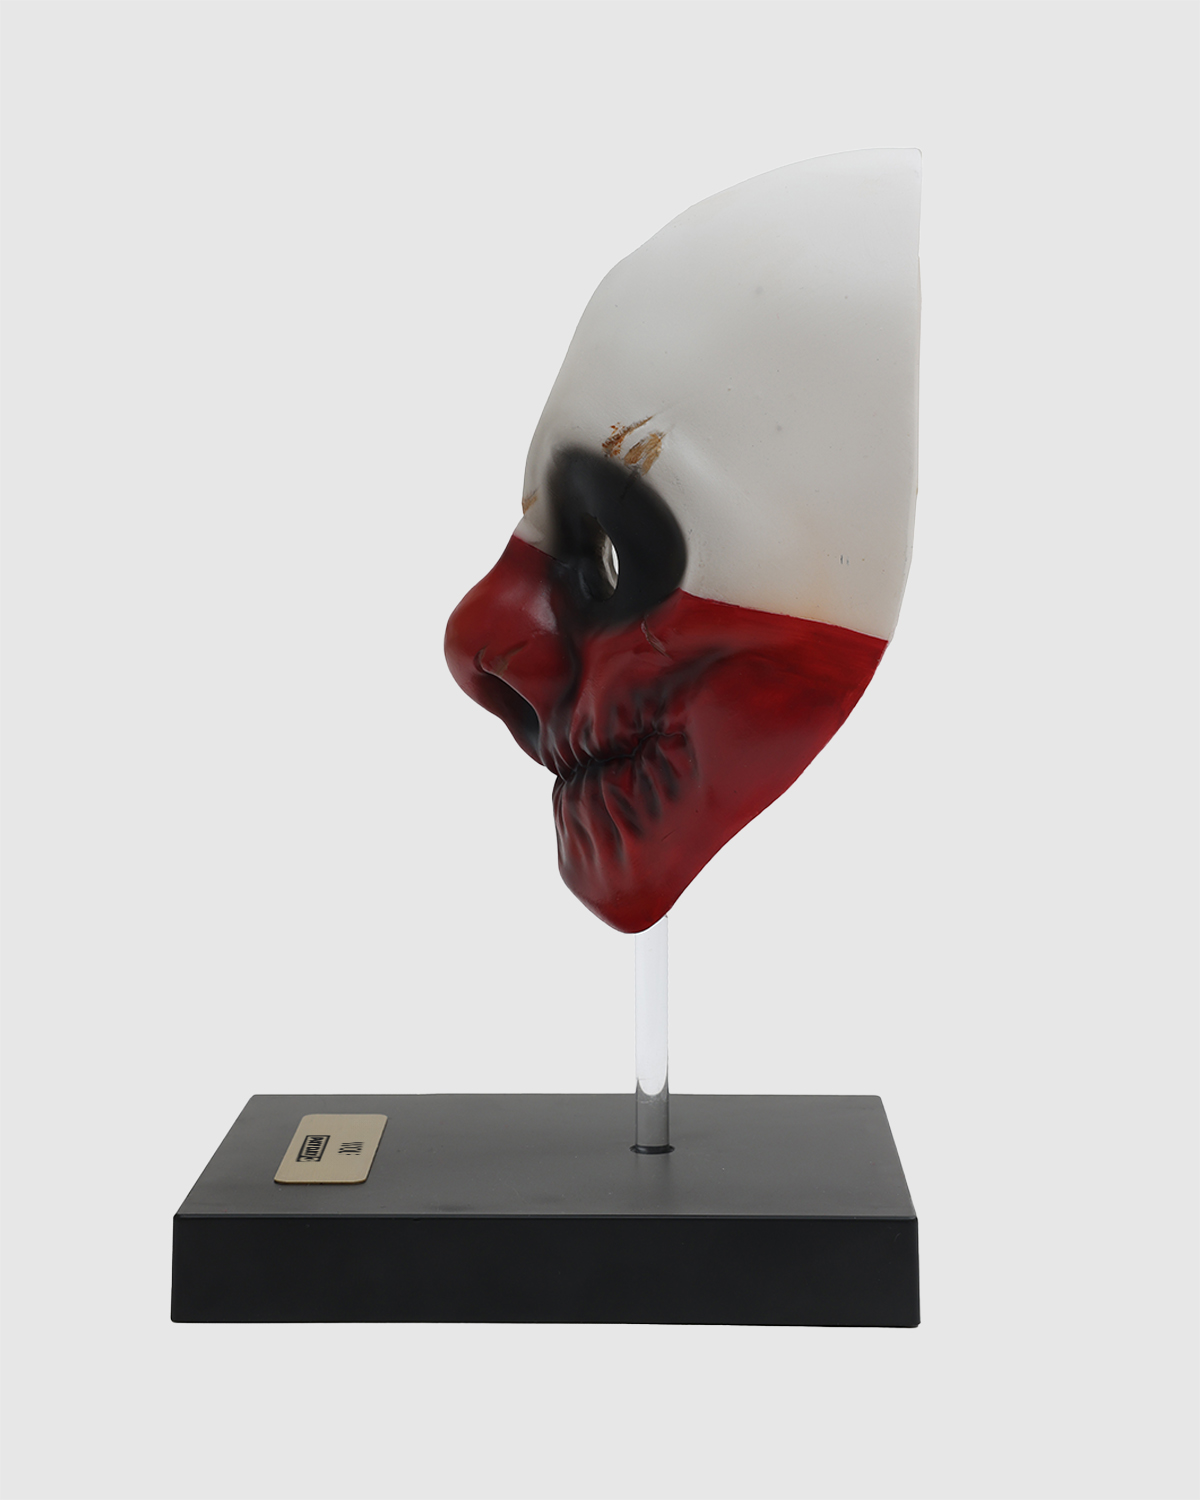 Limited Edition 1:2 scale Desktop Replica "Wolf Mask"